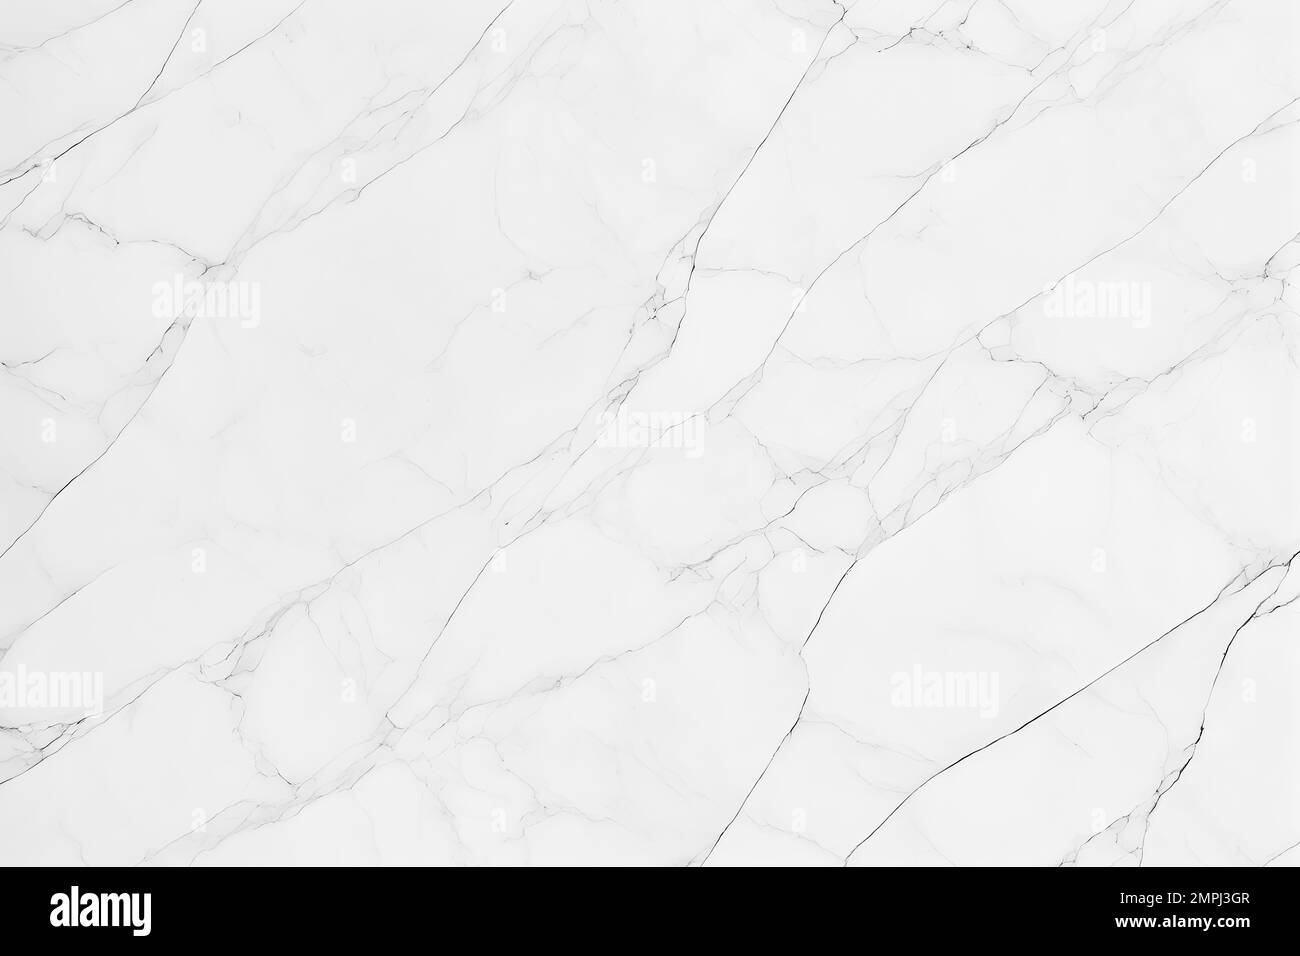 White marble texture, gray marble natural pattern, wallpaper high quality can be used as background for display or montage your top view products or w Stock Photo